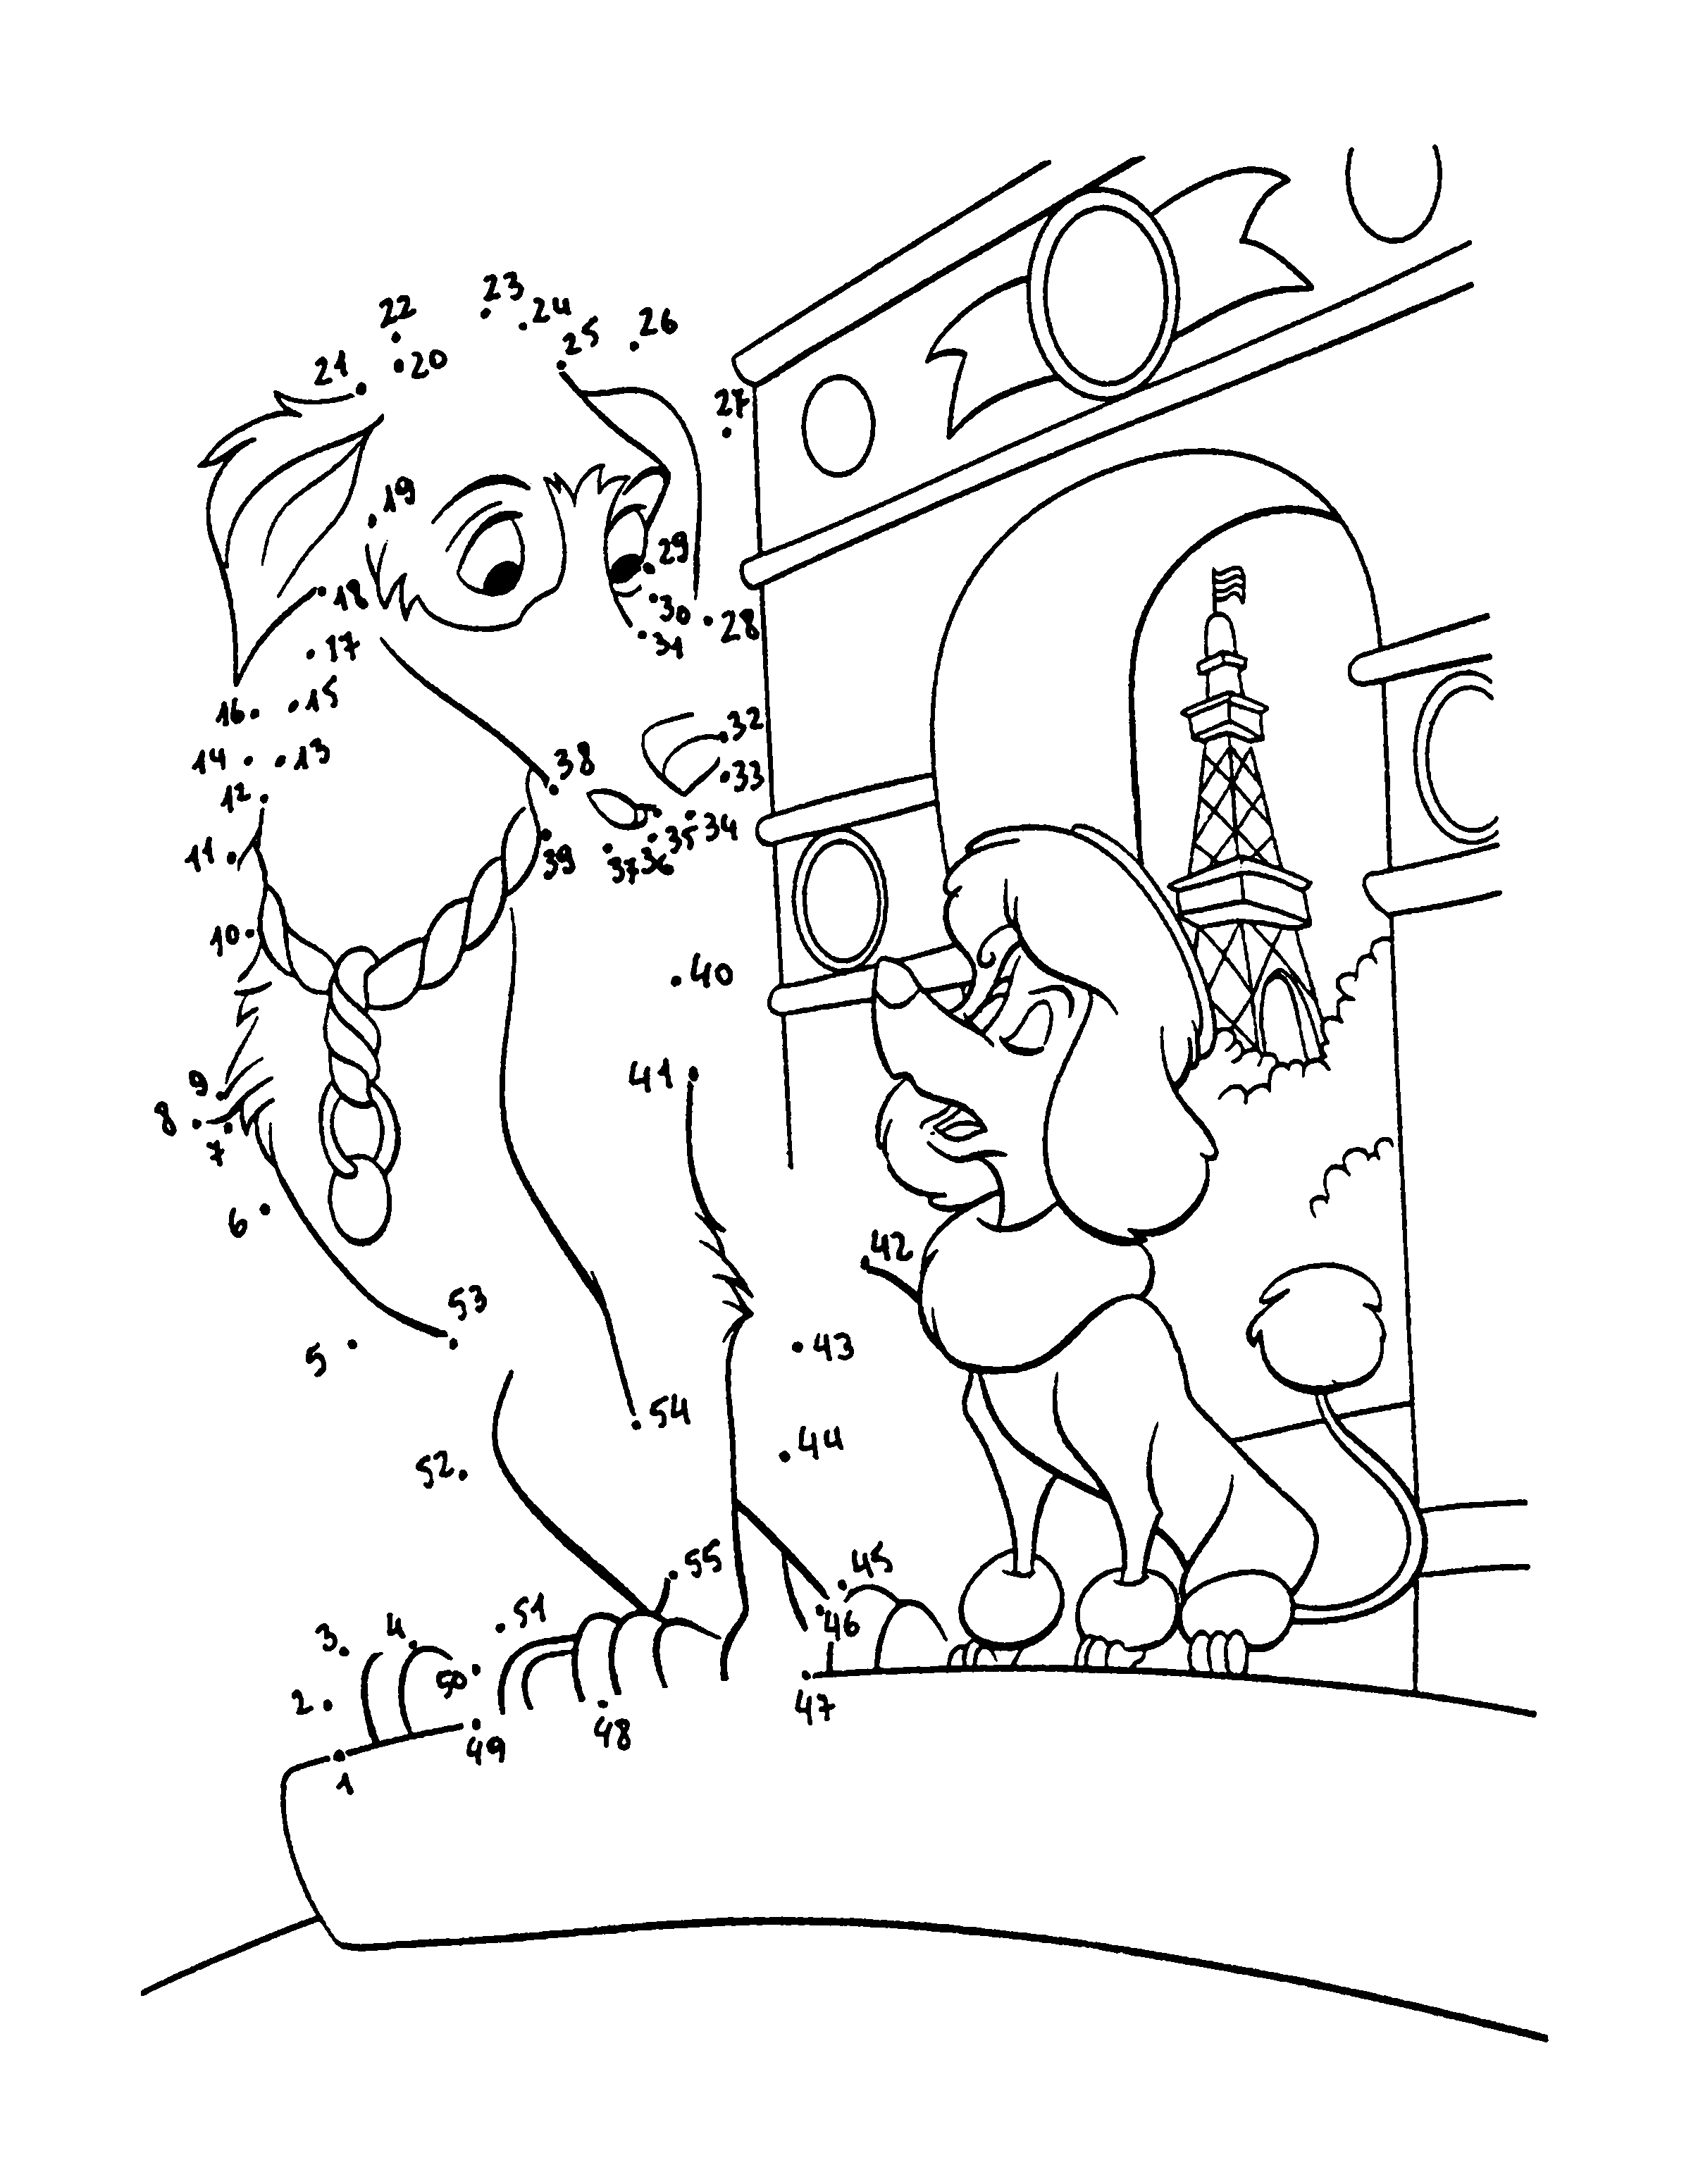 dalmatian fire dog coloring pages - photo #25